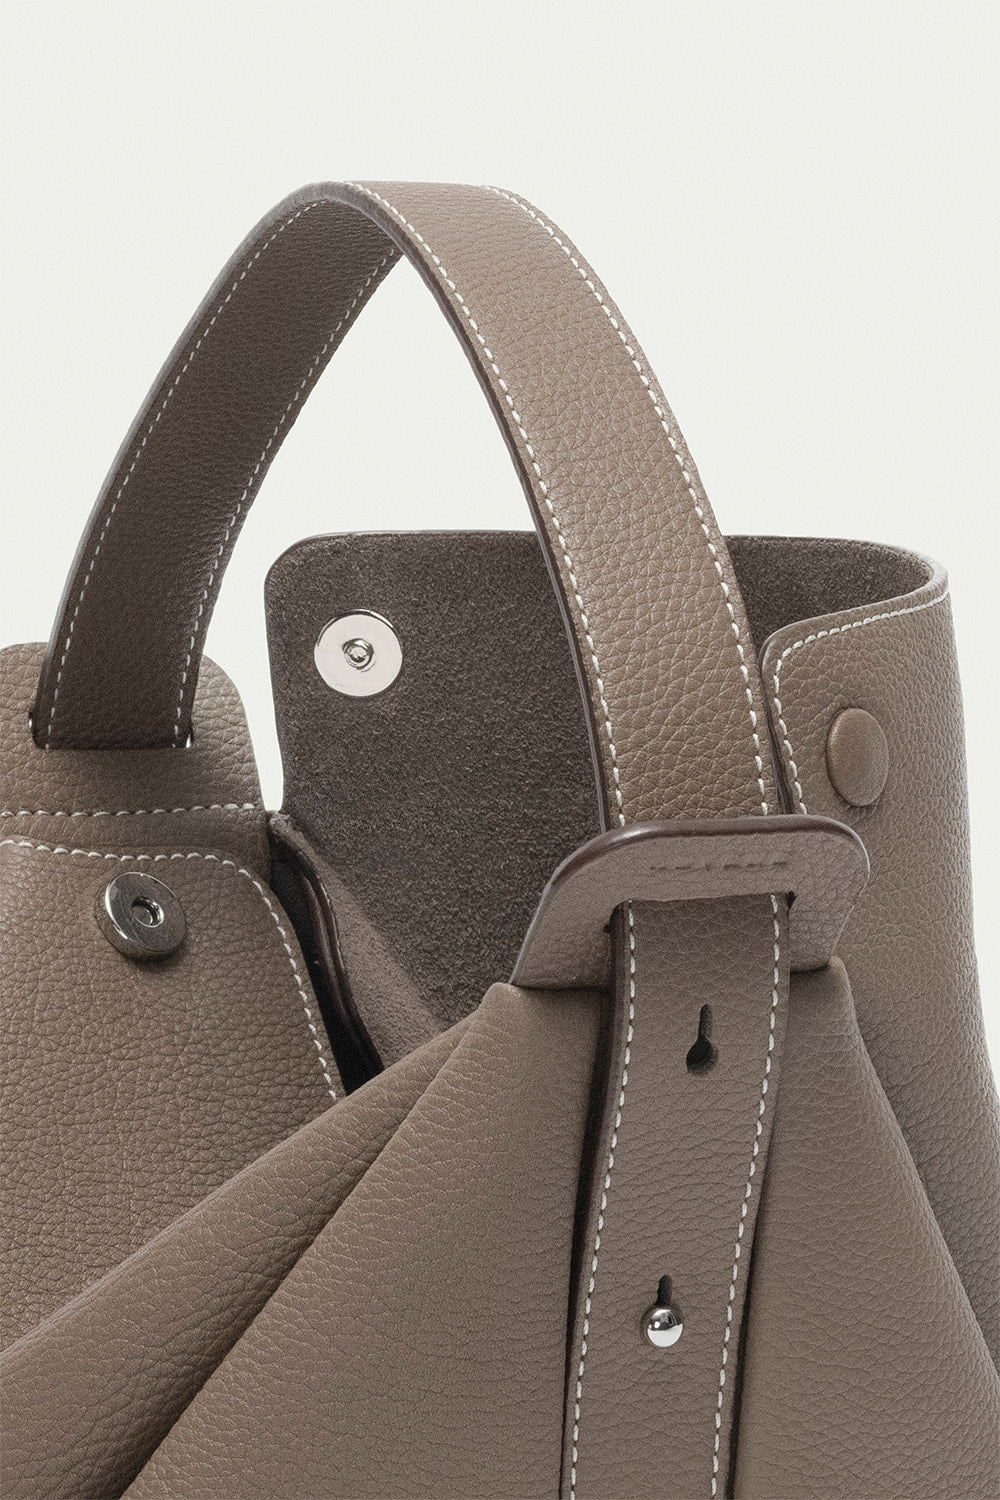 The Age Bag | Dark Taupe